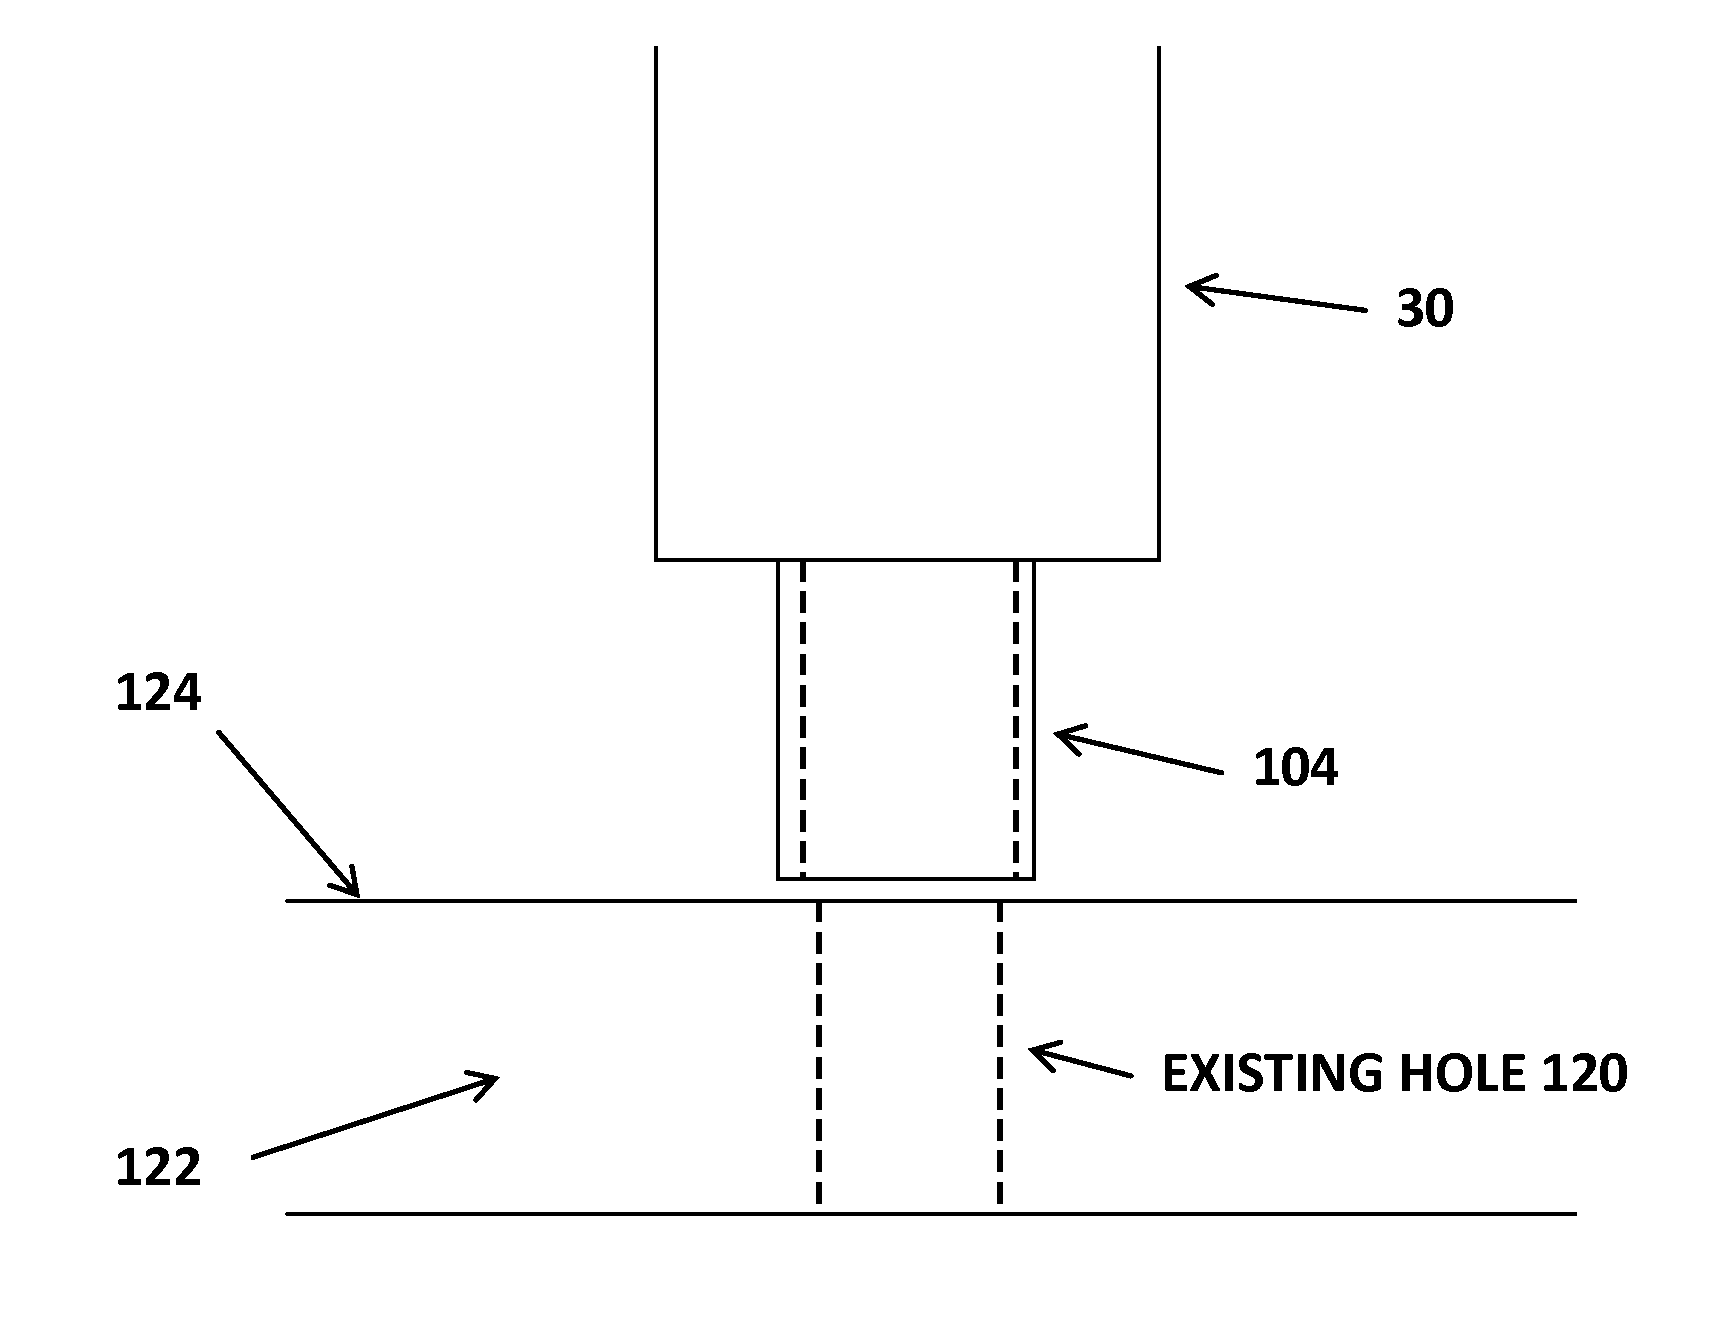 Friction bit joining of materials